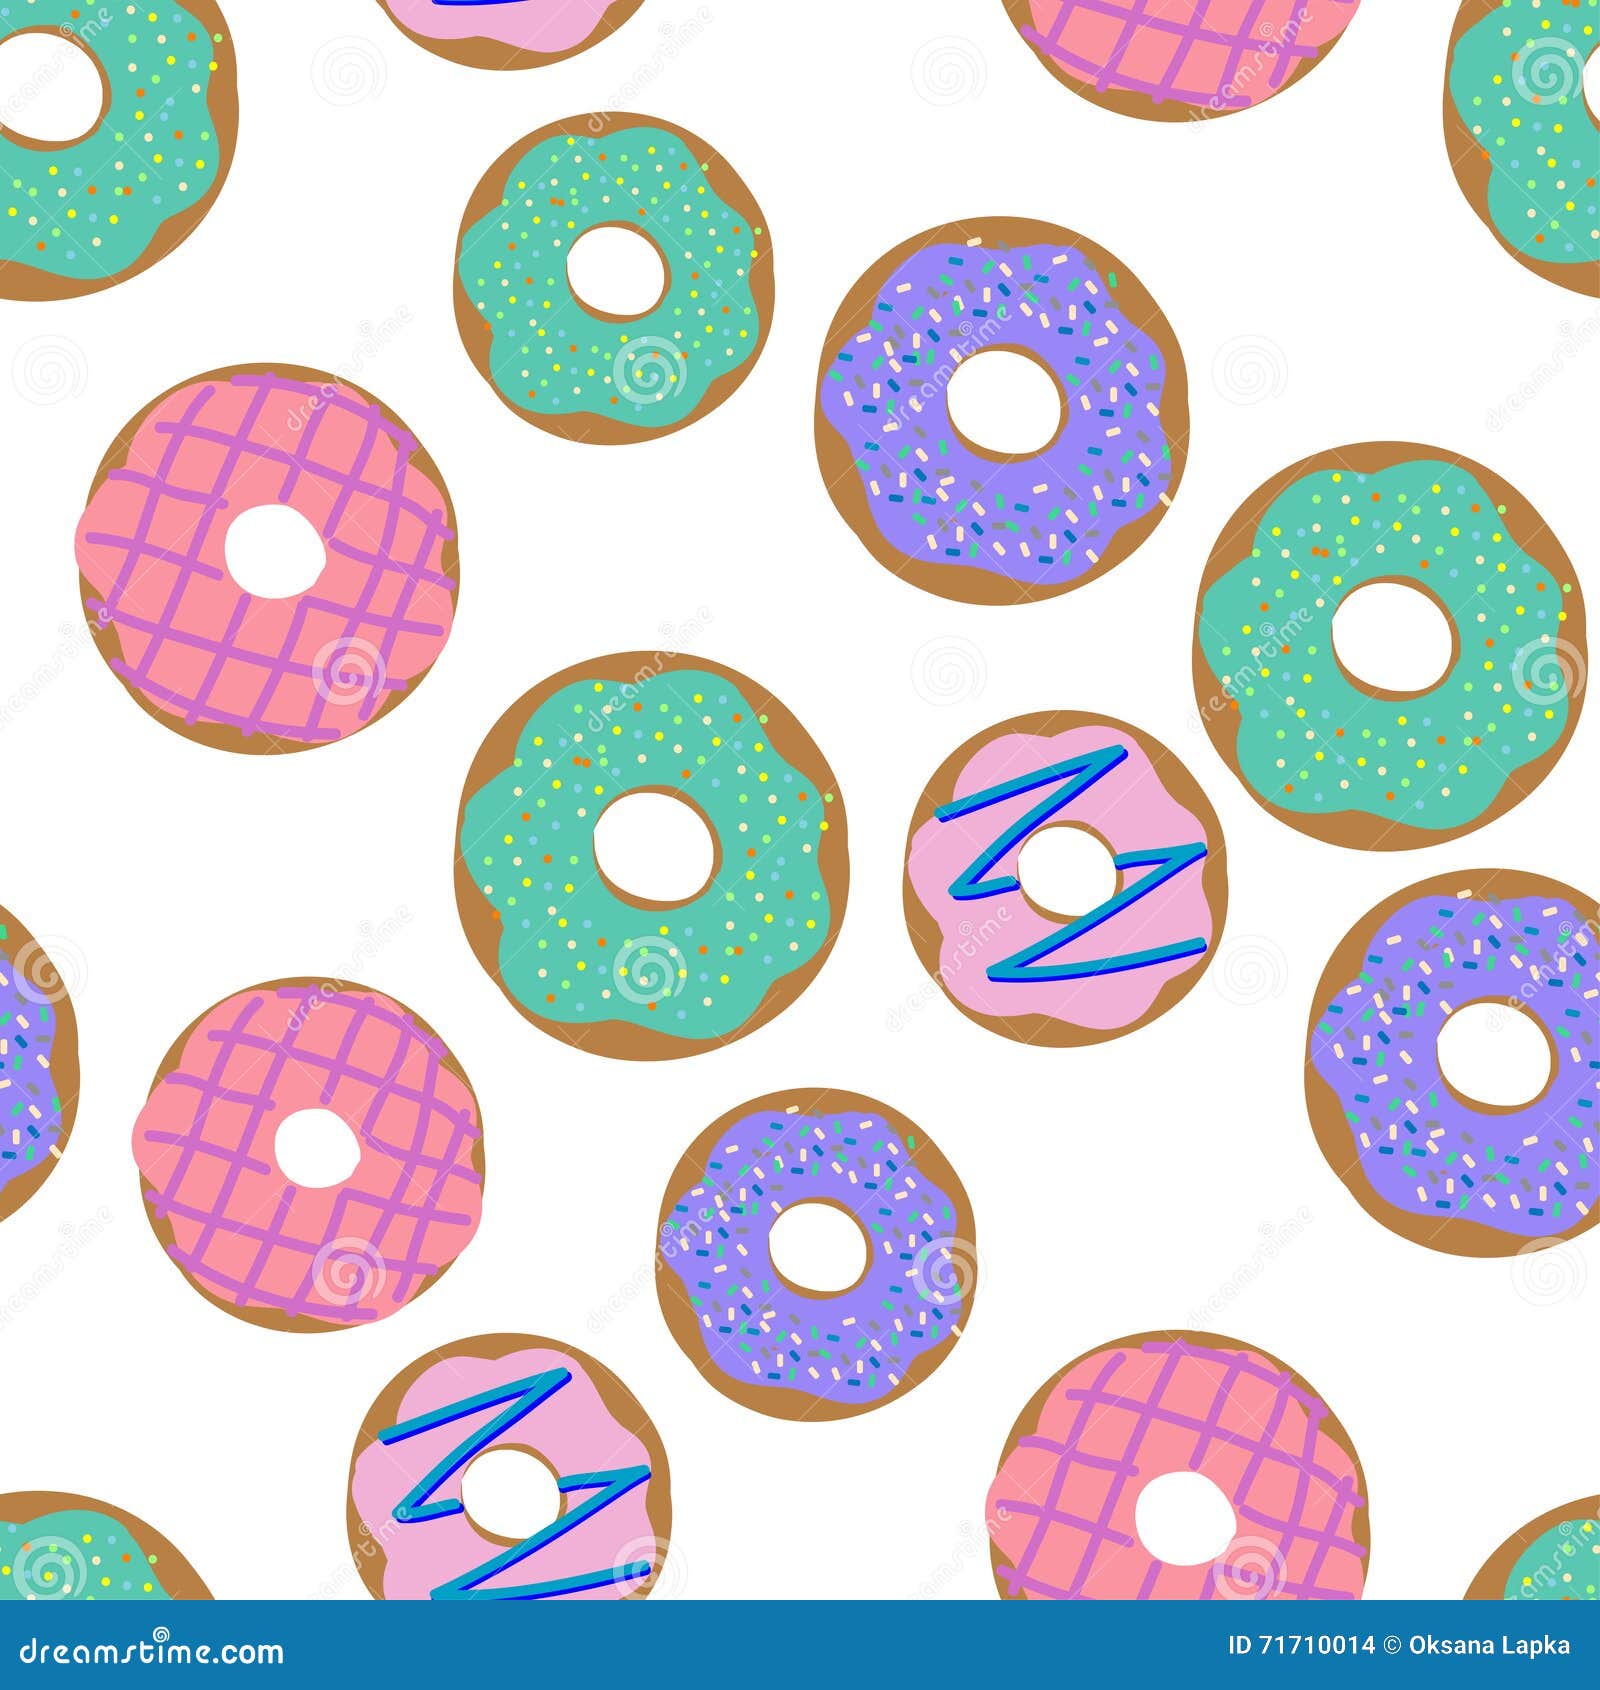 Donuts Pattern. Vector Illustration Seamless Pattern With Colorful Donuts  With Glaze And Sprinkles On A White Background Illustration 71710014 -  Megapixl